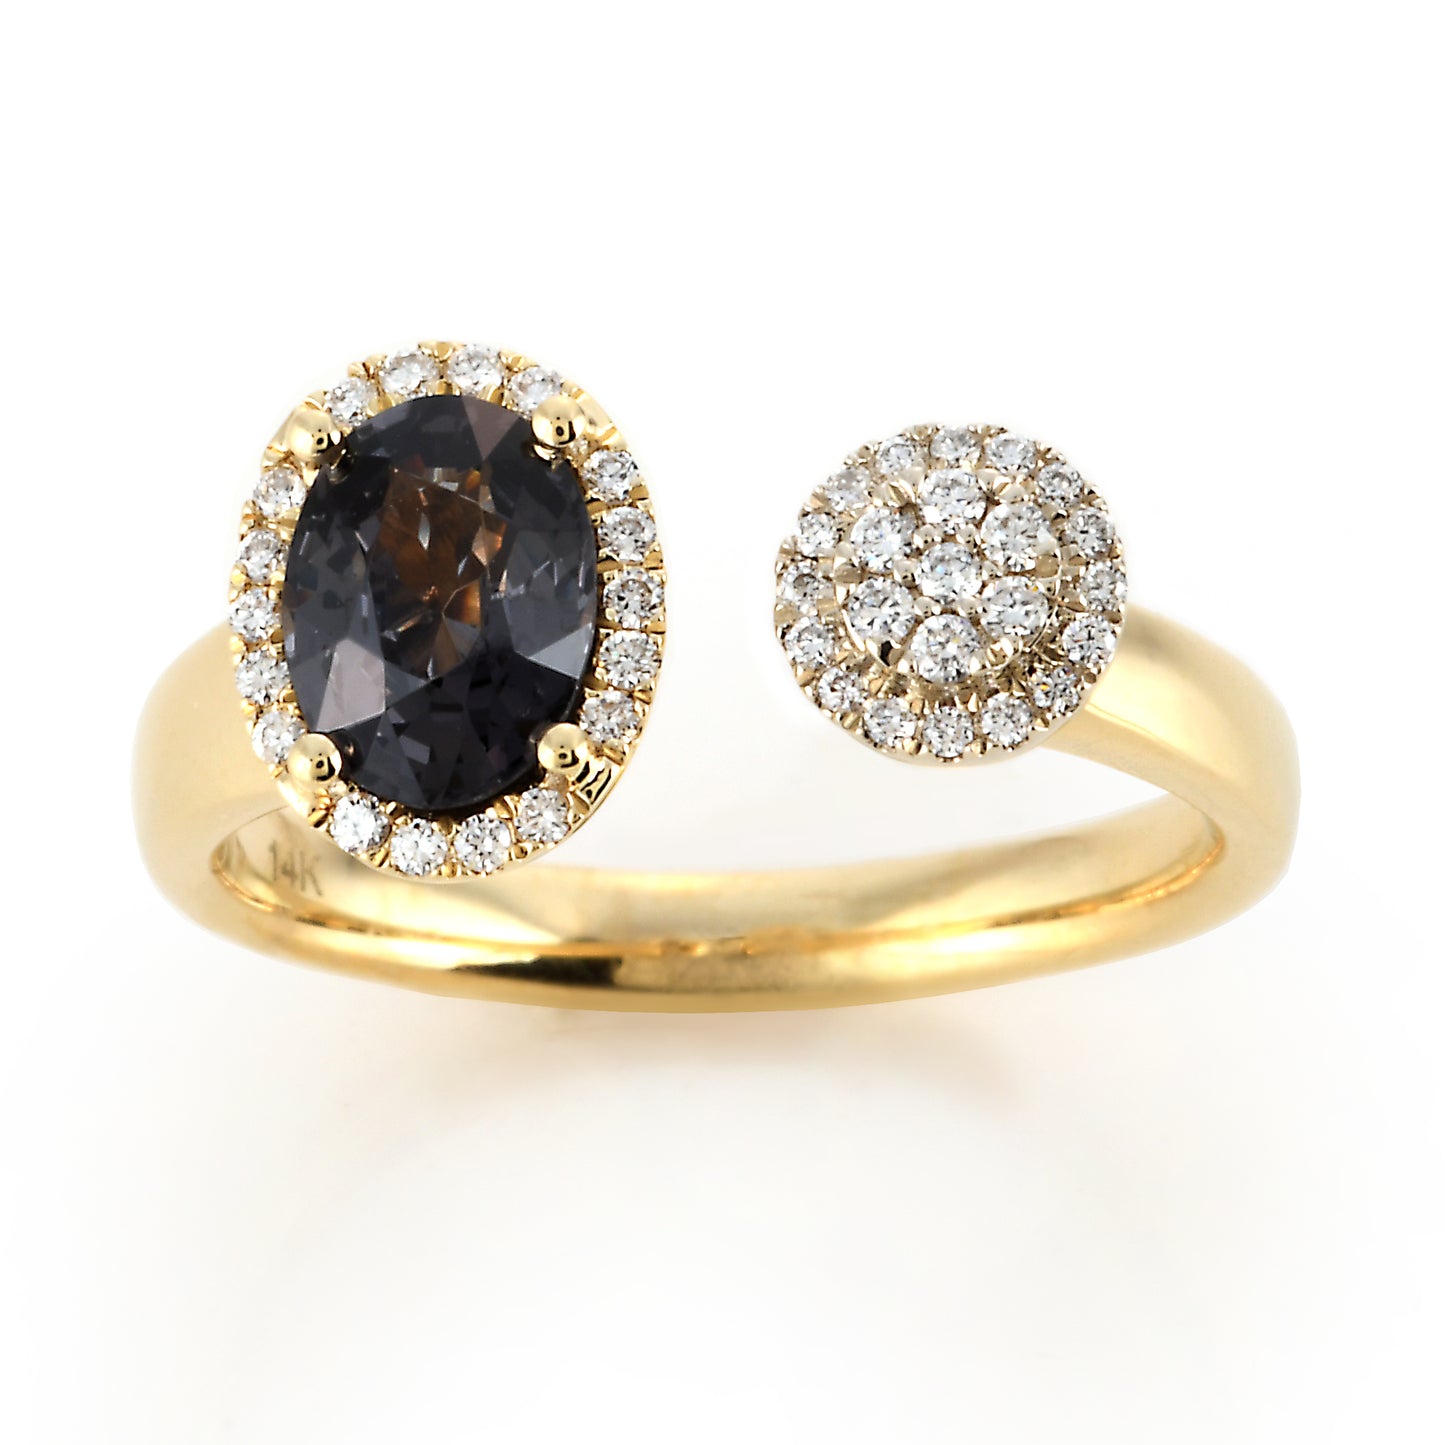 Grey Spinel and Diamond Ring in 14K Yellow Gold